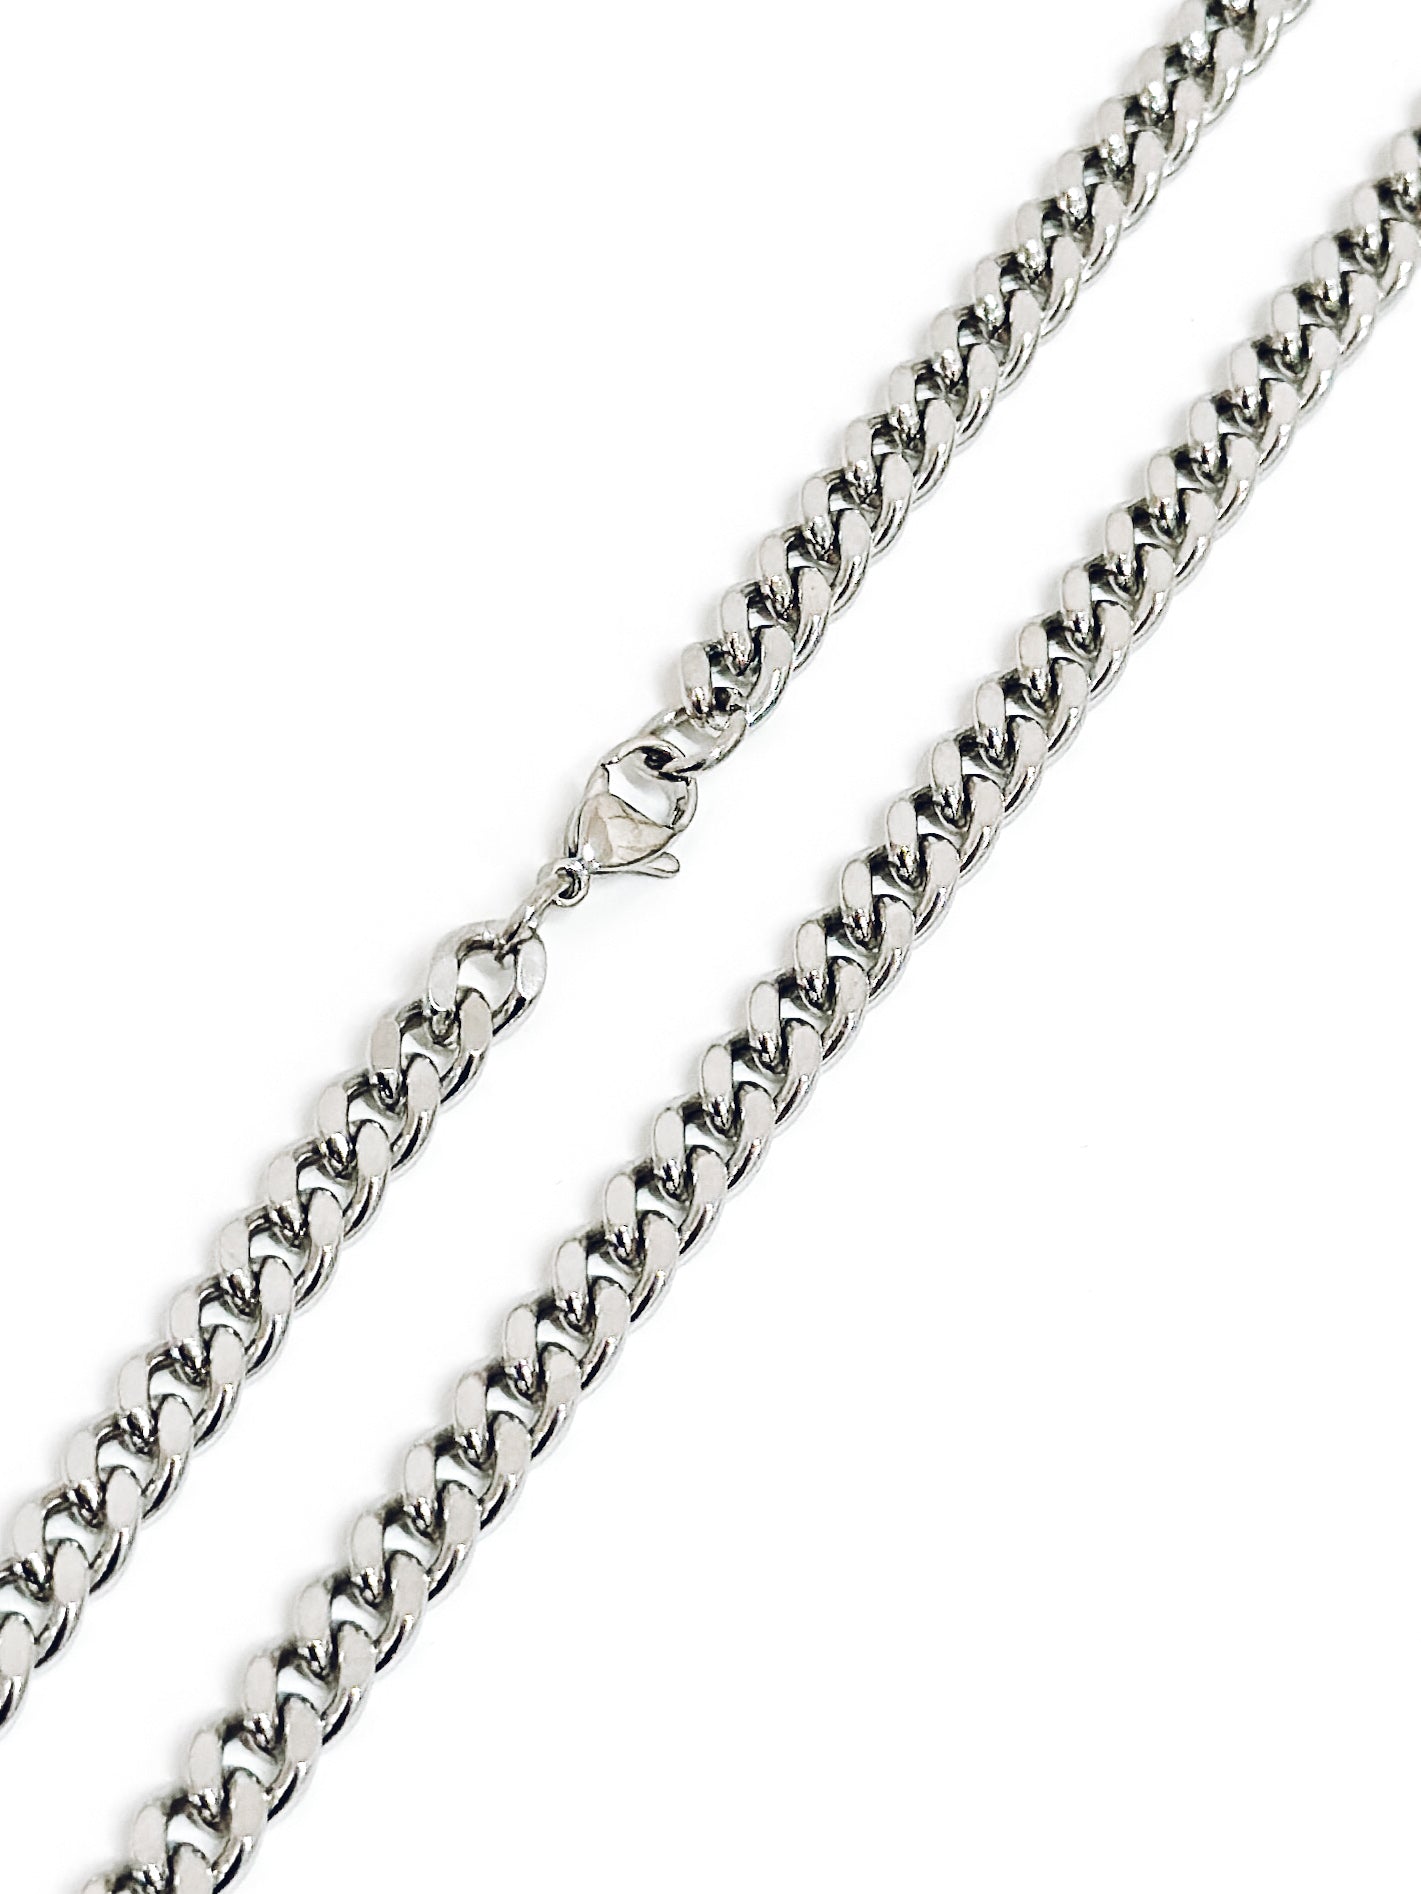 Cuban Curb Men's Necklace | Stainless Steel 316L